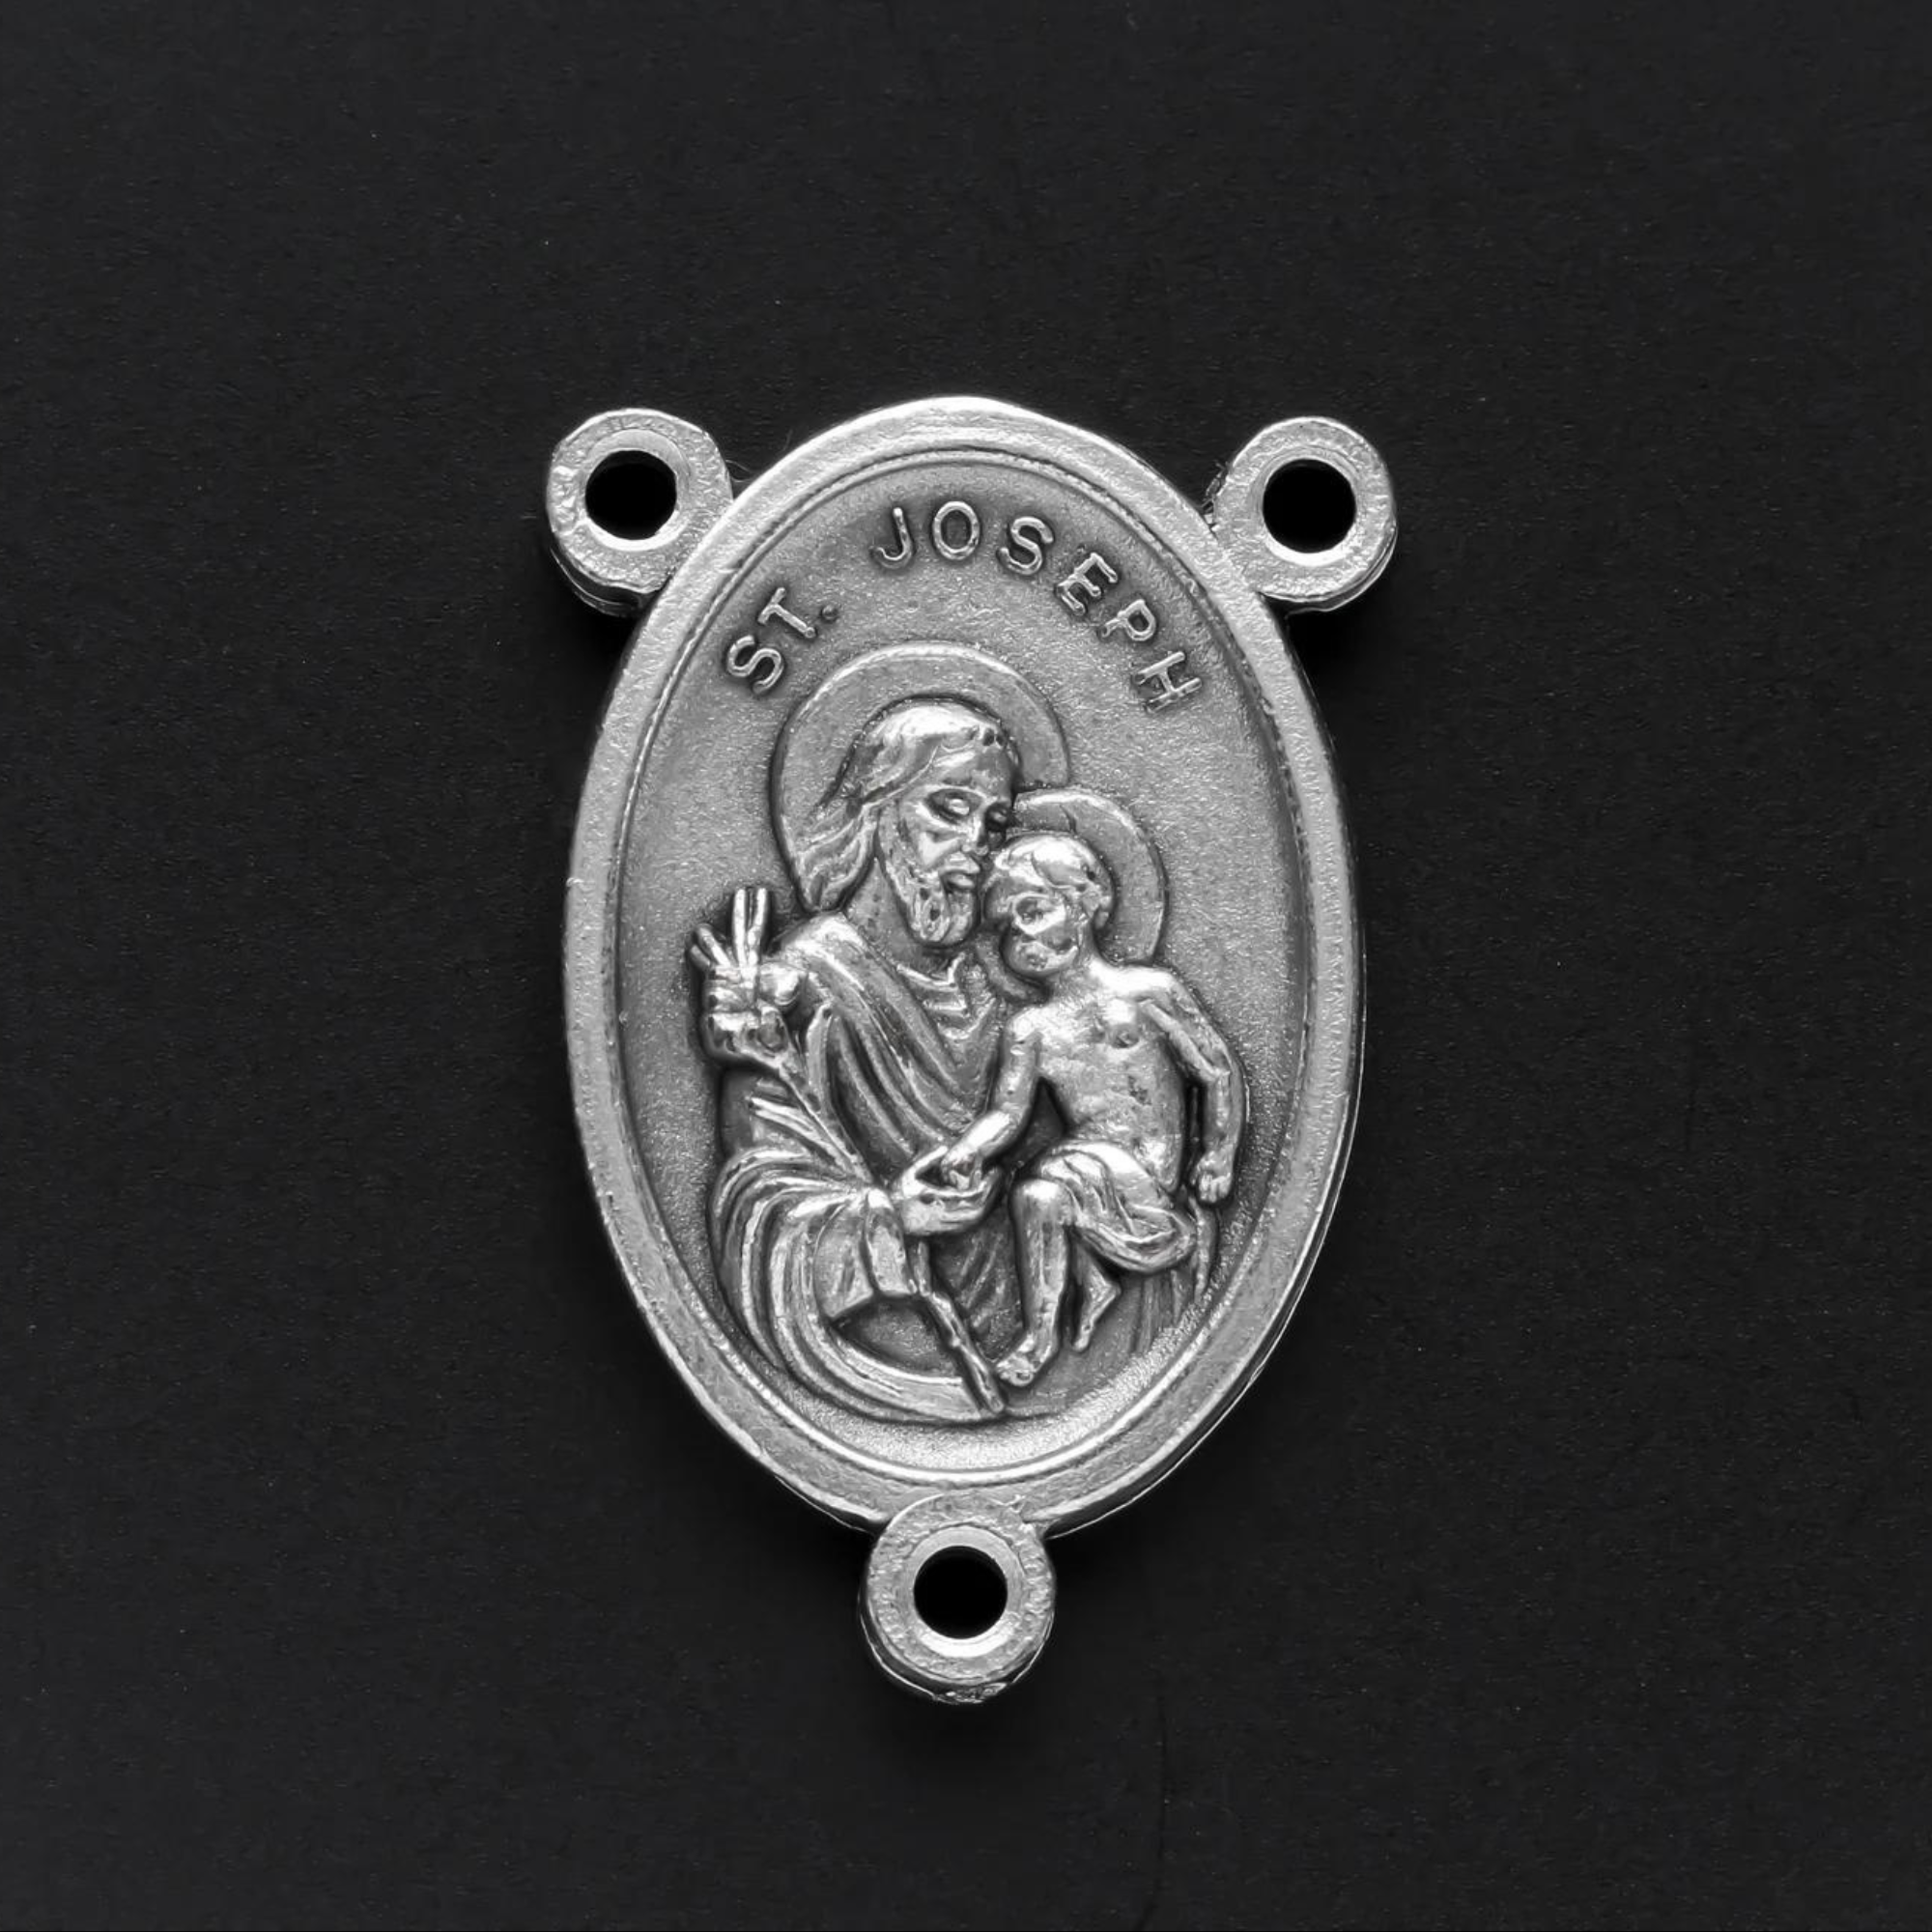 Saint Joseph rosary centerpiece. The front of the medal depicts Saint Joseph holding child Jesus in one arm and a lily in the other. The reverse side is marked "Pray For Us"